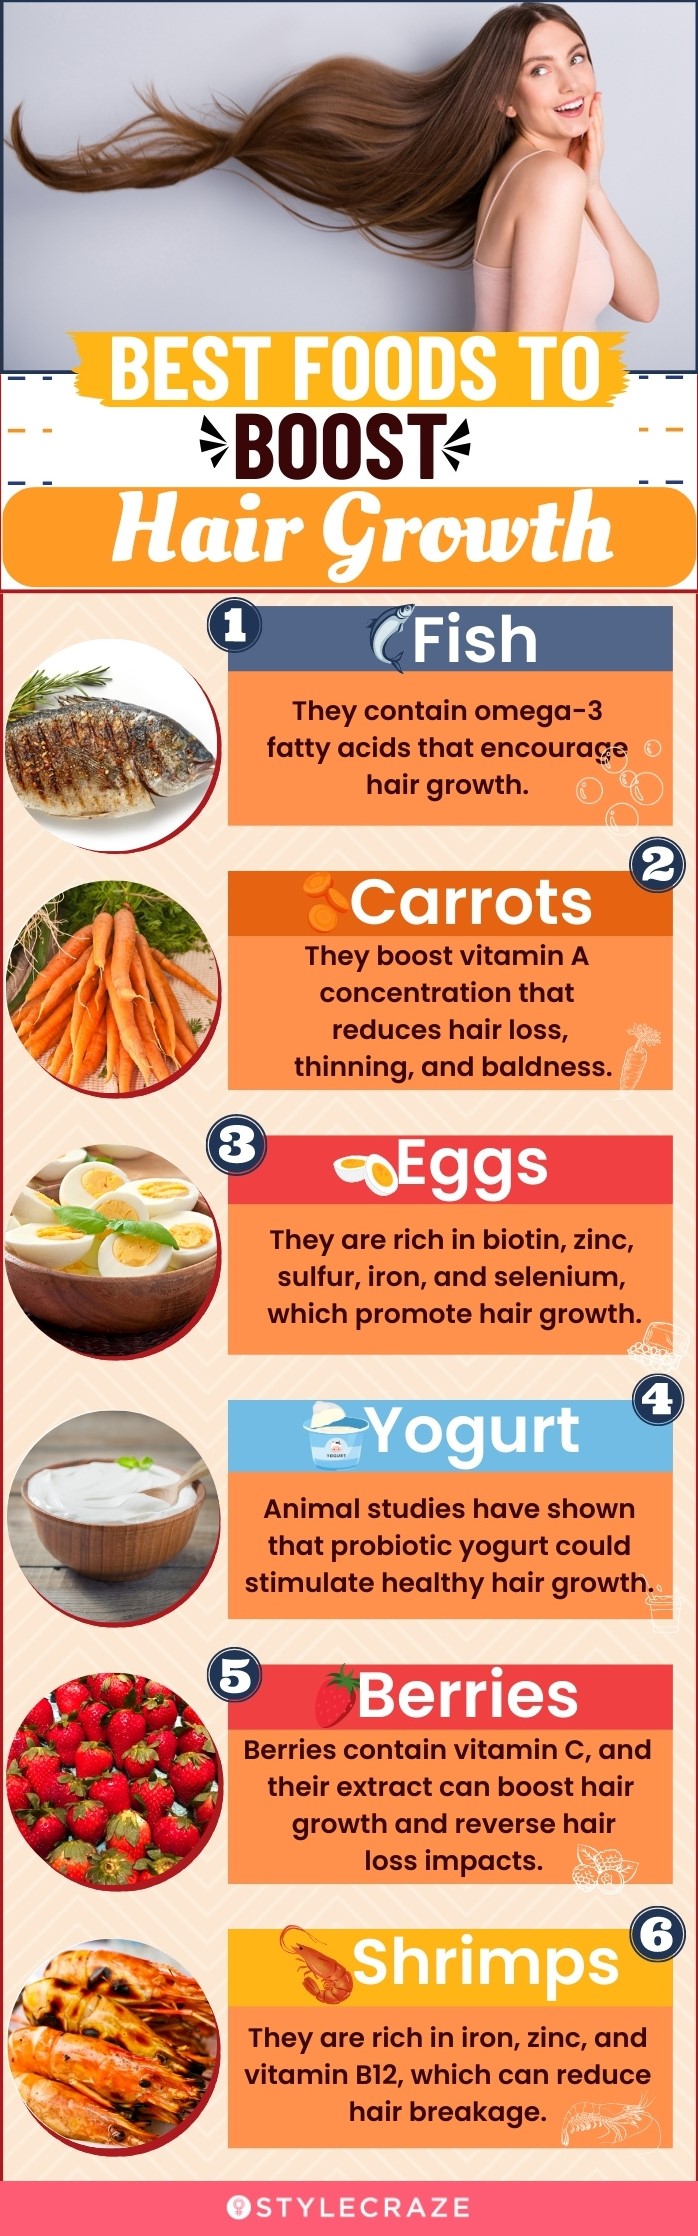 10 Plant-Based Foods That Make Your Hair Gorgeous - One Green Planet